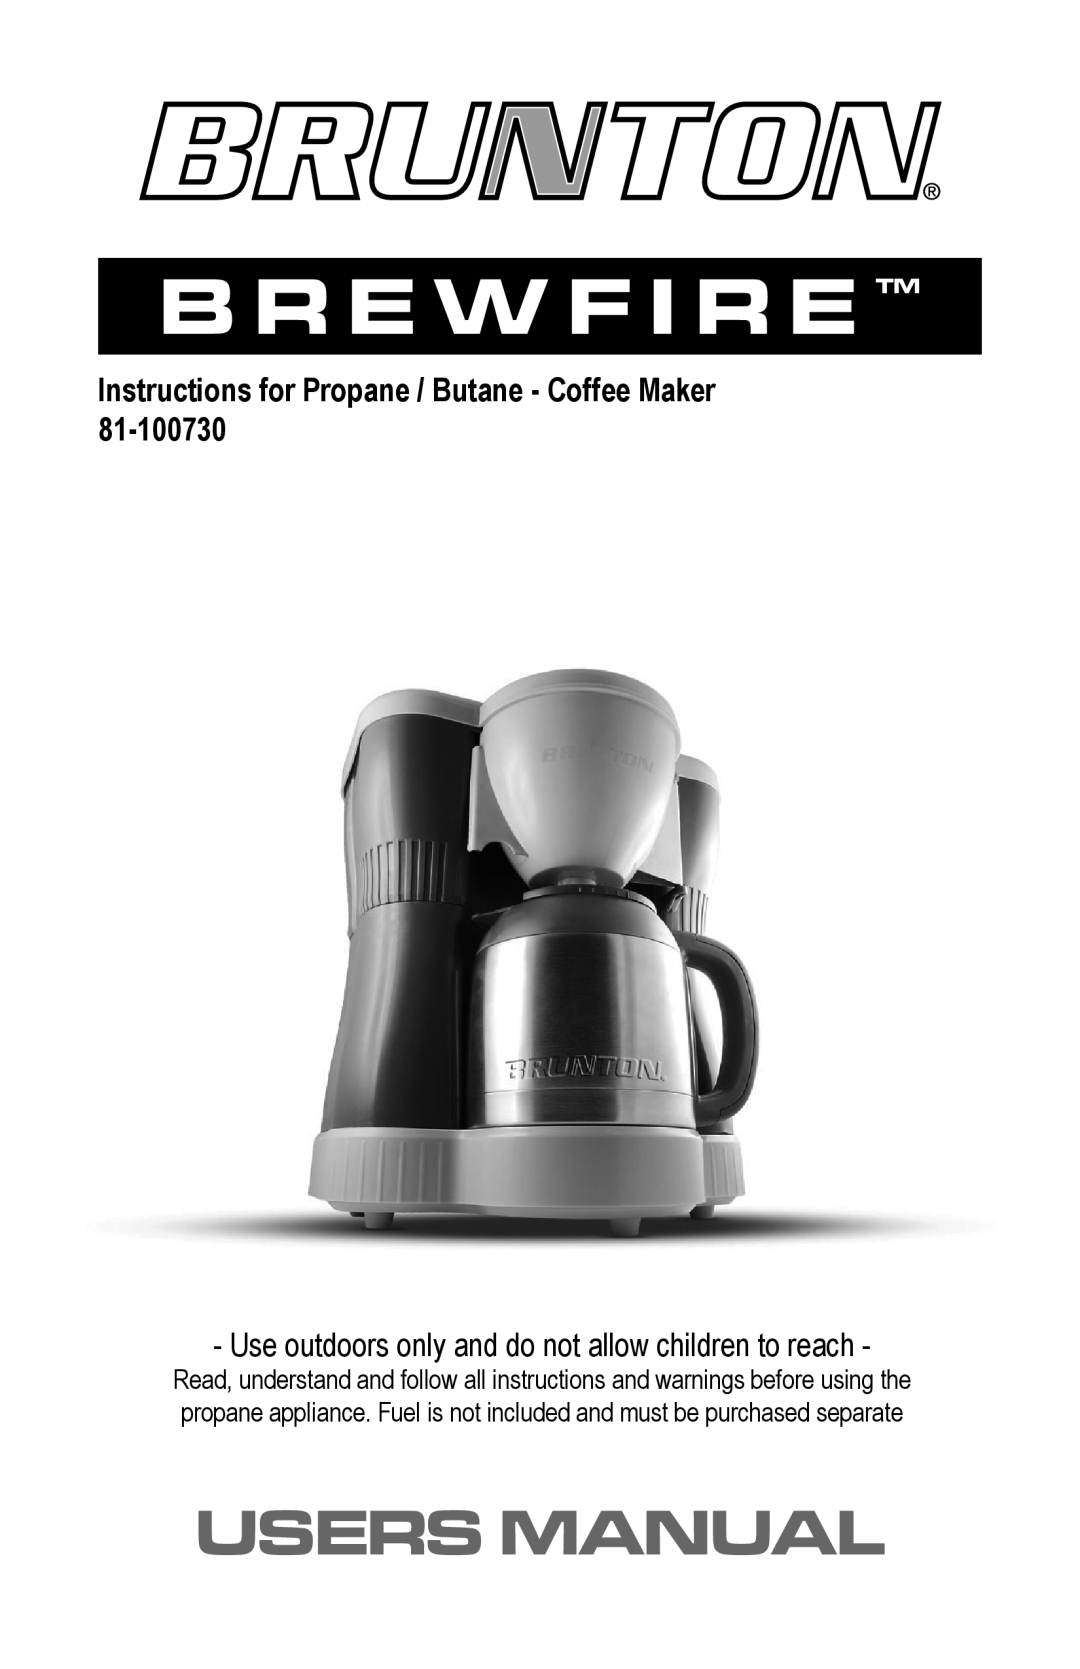 Brunton 81-100730 user manual Use outdoors only and do not allow children to reach, B R E W F I R E Tm 